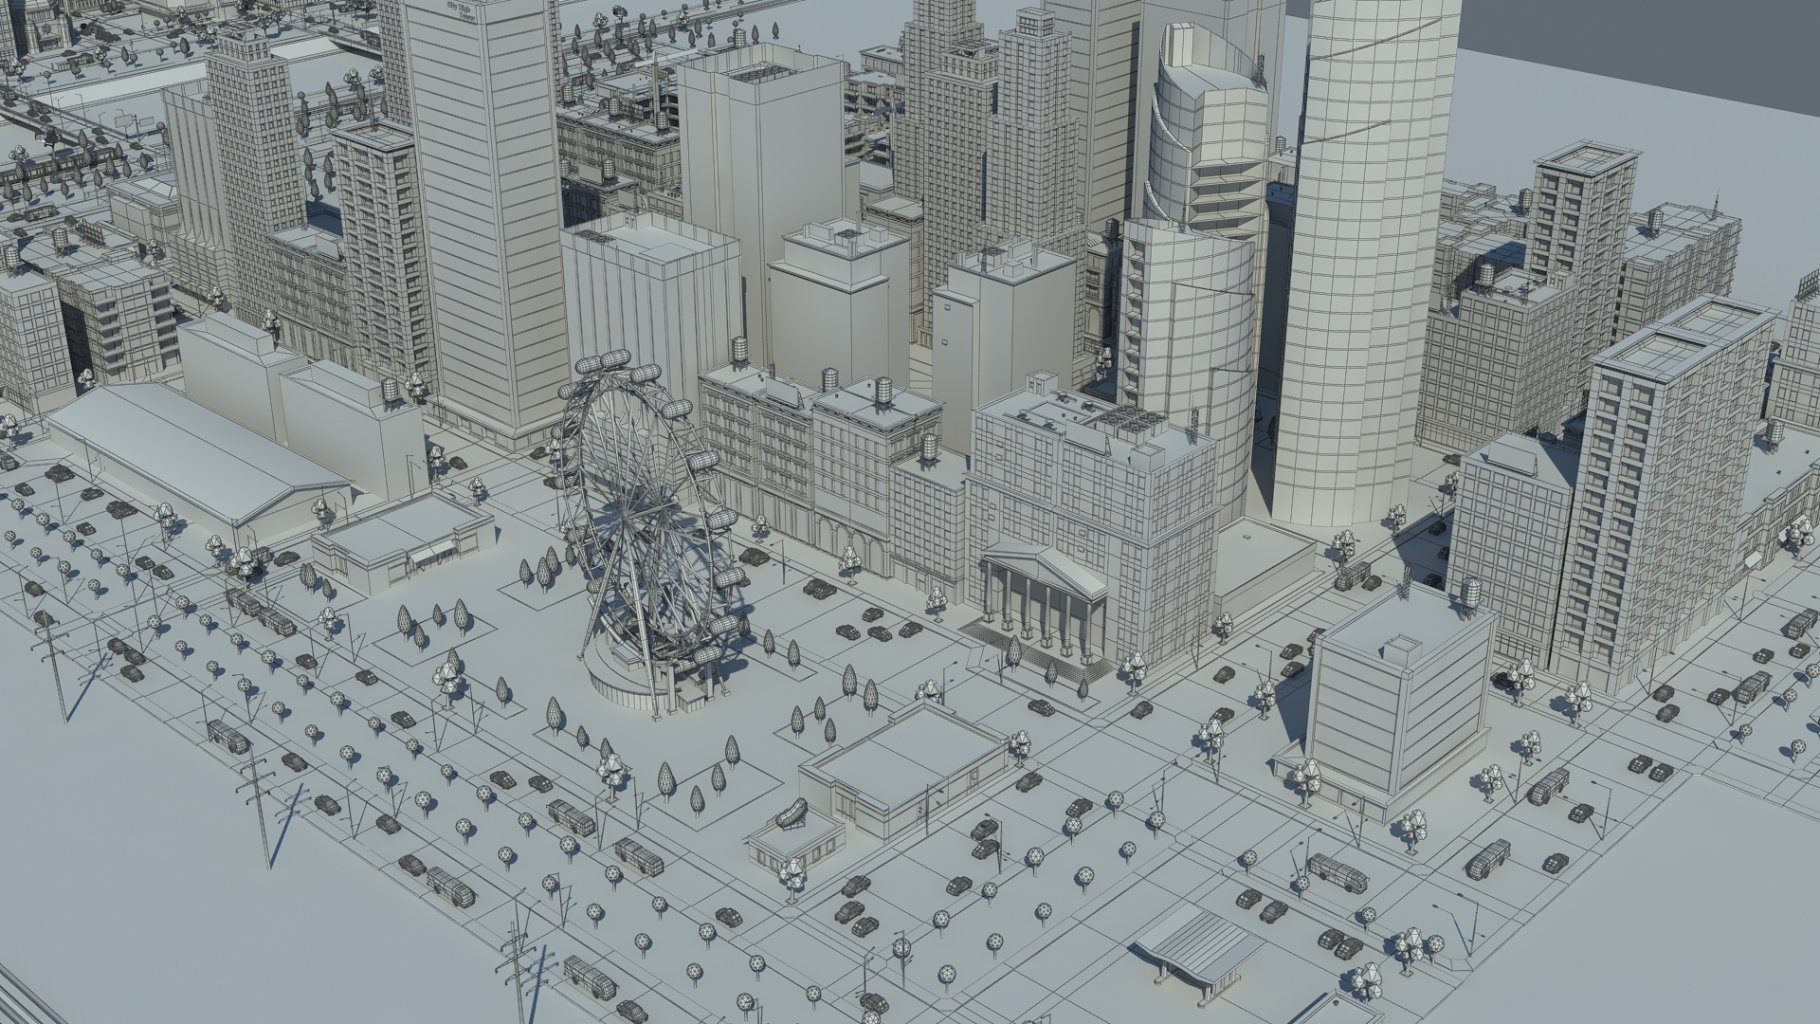 Rendering an amazing low poly 3d city model without textures